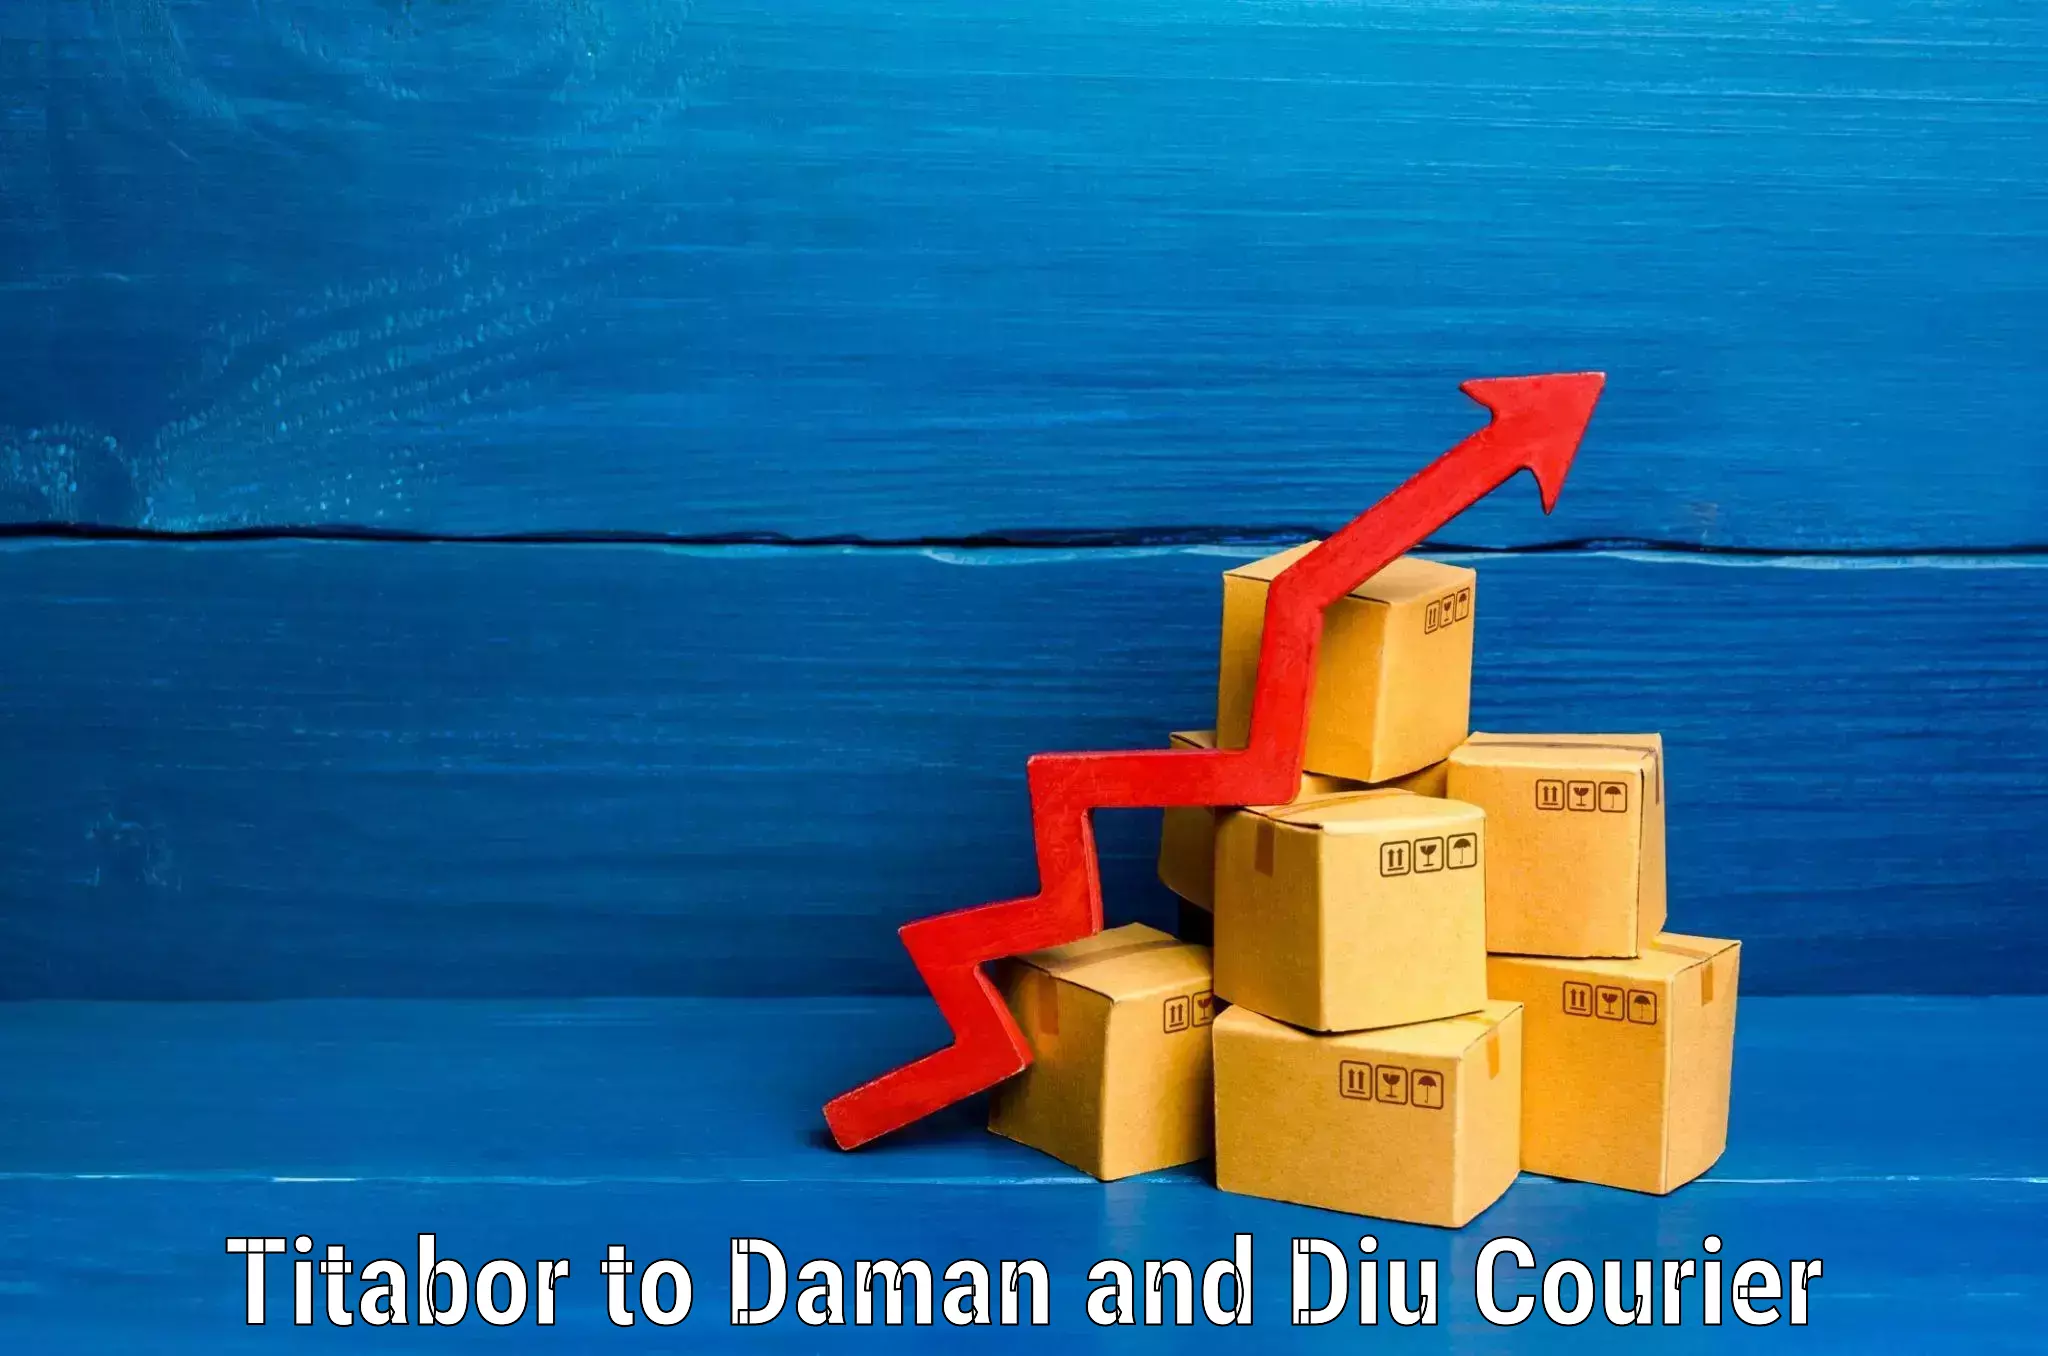 Luggage shipment specialists Titabor to Daman and Diu